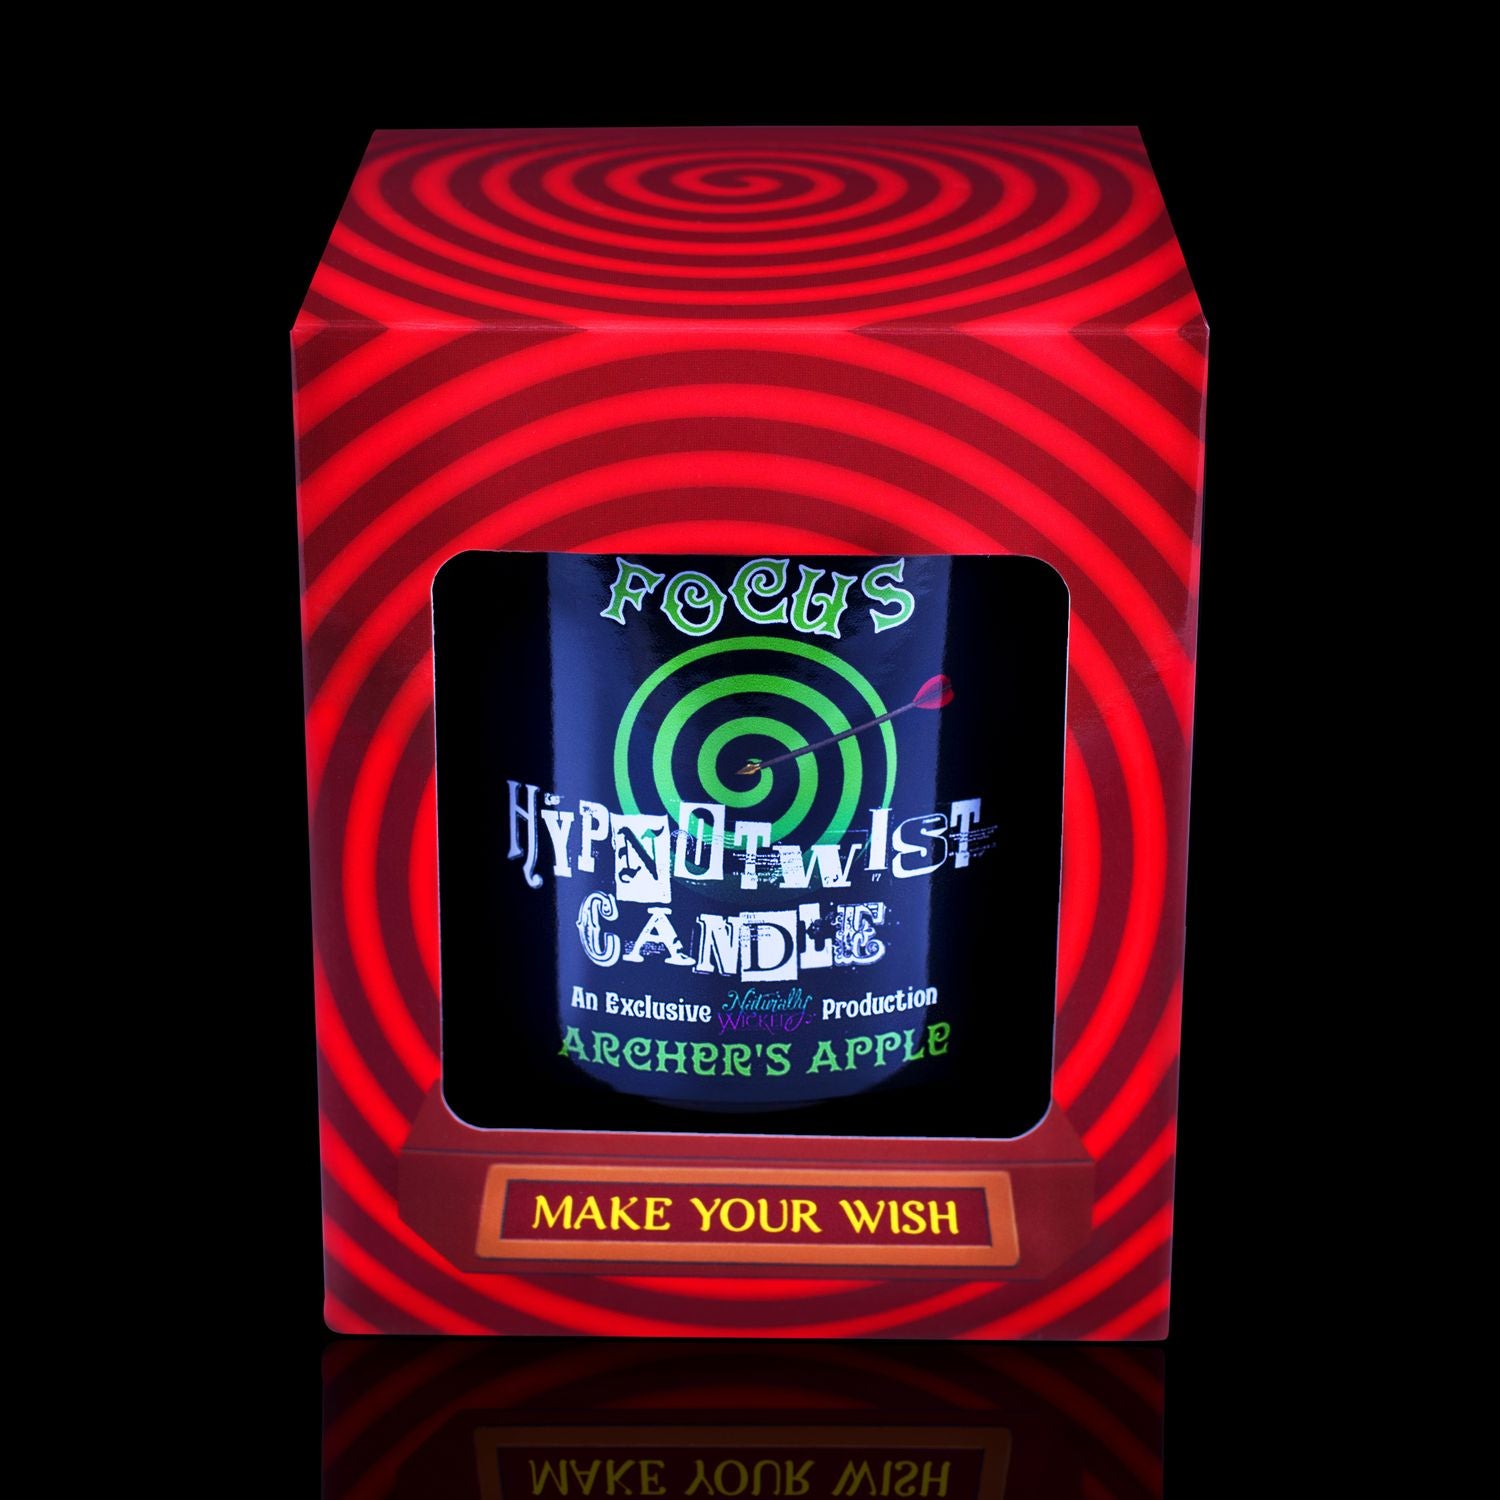 Make Your Wish With The Naturally Wicked Hypnotwist Focus Candle, Plant-based Soy Green Wax Scented With Archer's Apple, Including A Green Aventurine Crystal Spinning Top, Mirrored Lid & Red Circus Hypnotic Gift Box